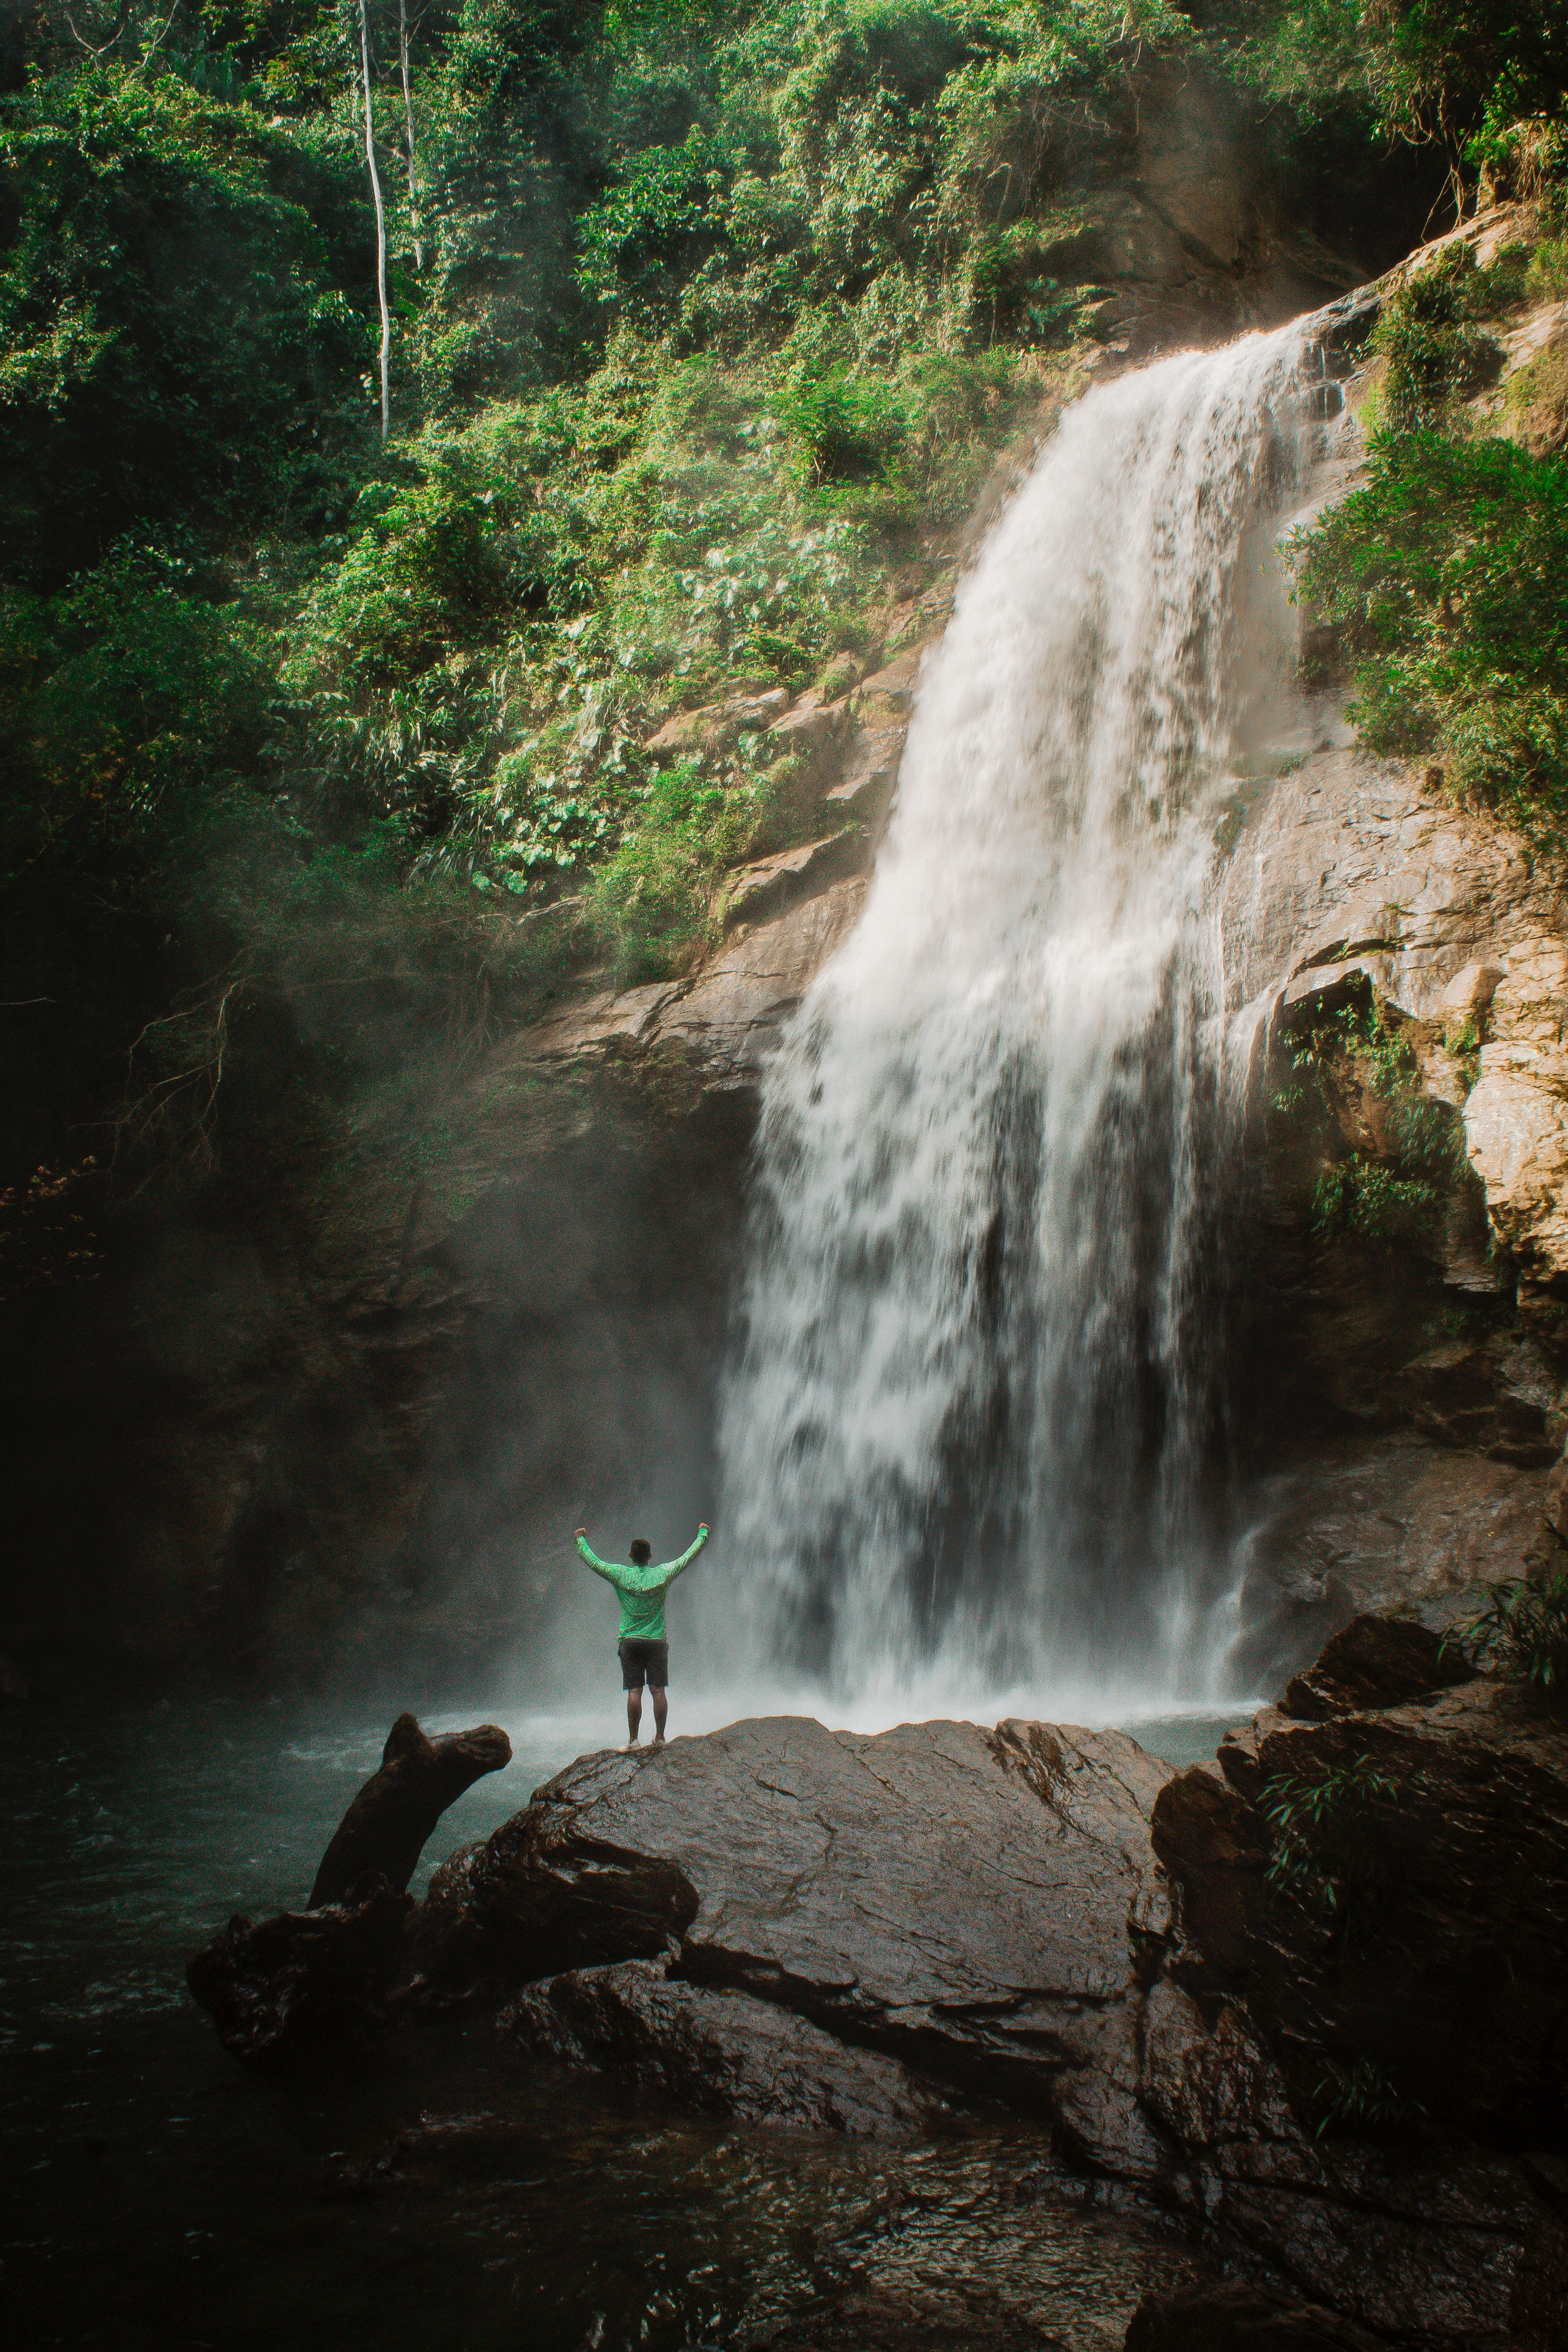 Man on a hike posing in front of a waterfall